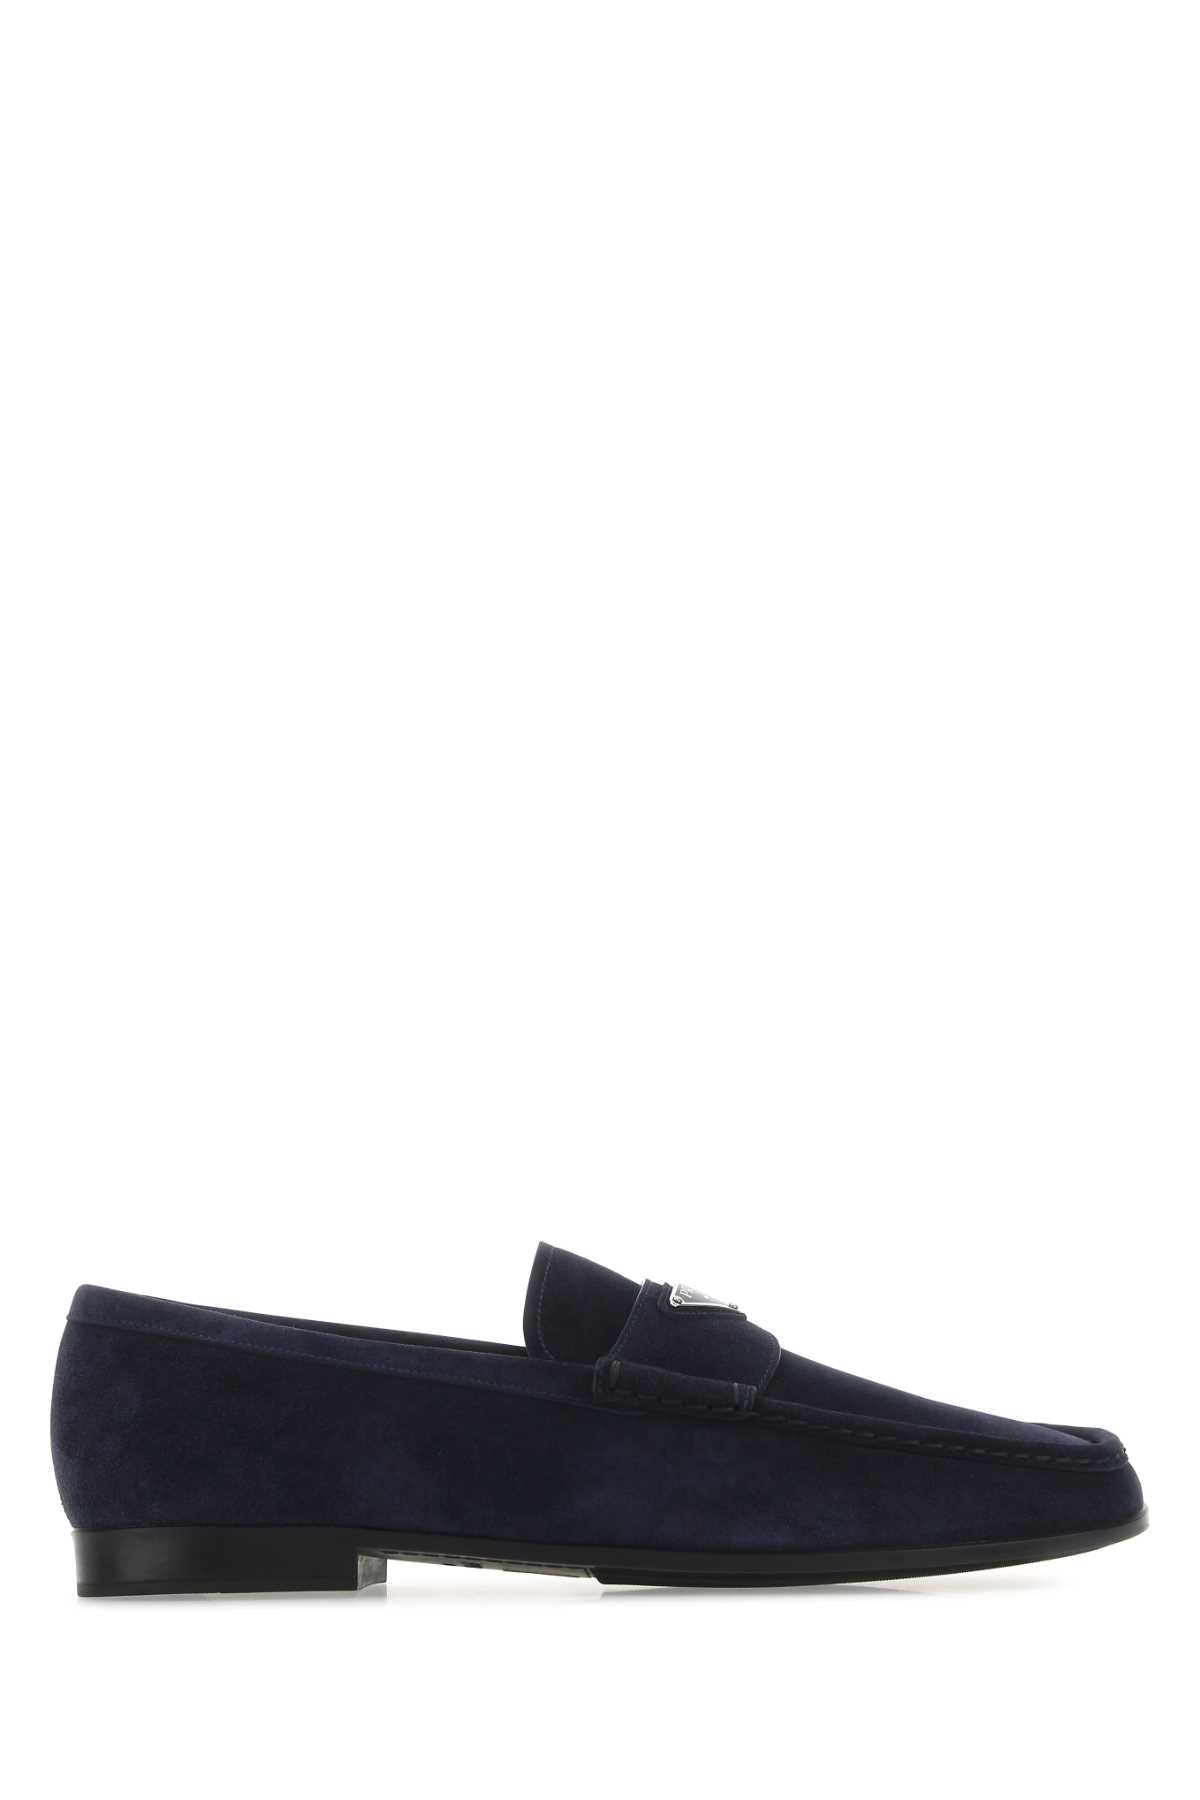 Shop Prada Navy Blue Suede Loafers In F0008